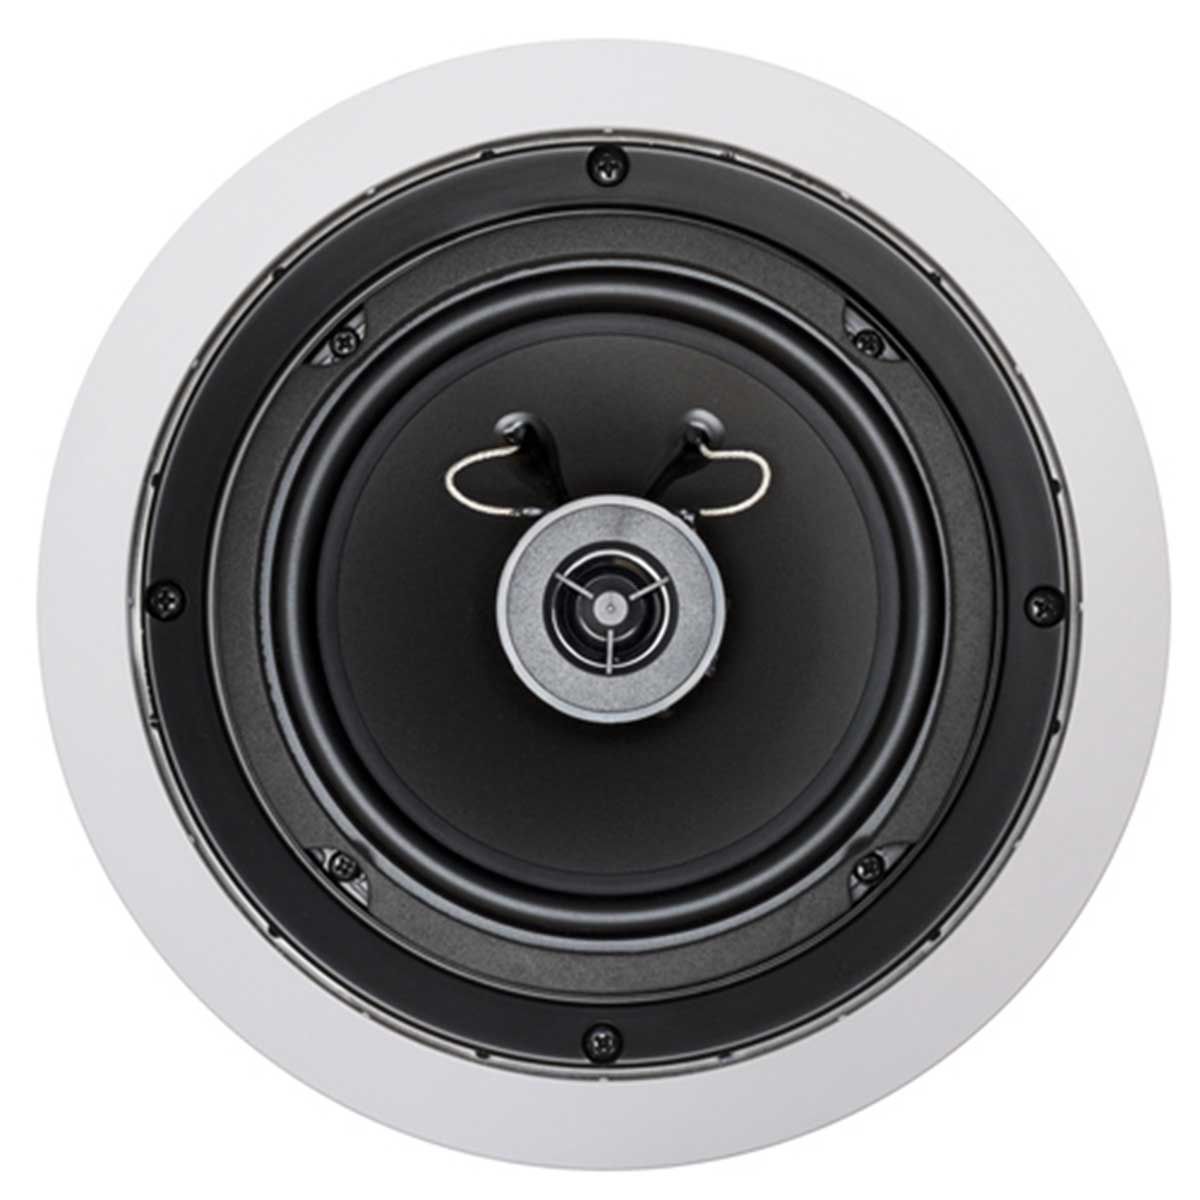 Cambridge Audio C155 In-Ceiling Speaker without grill